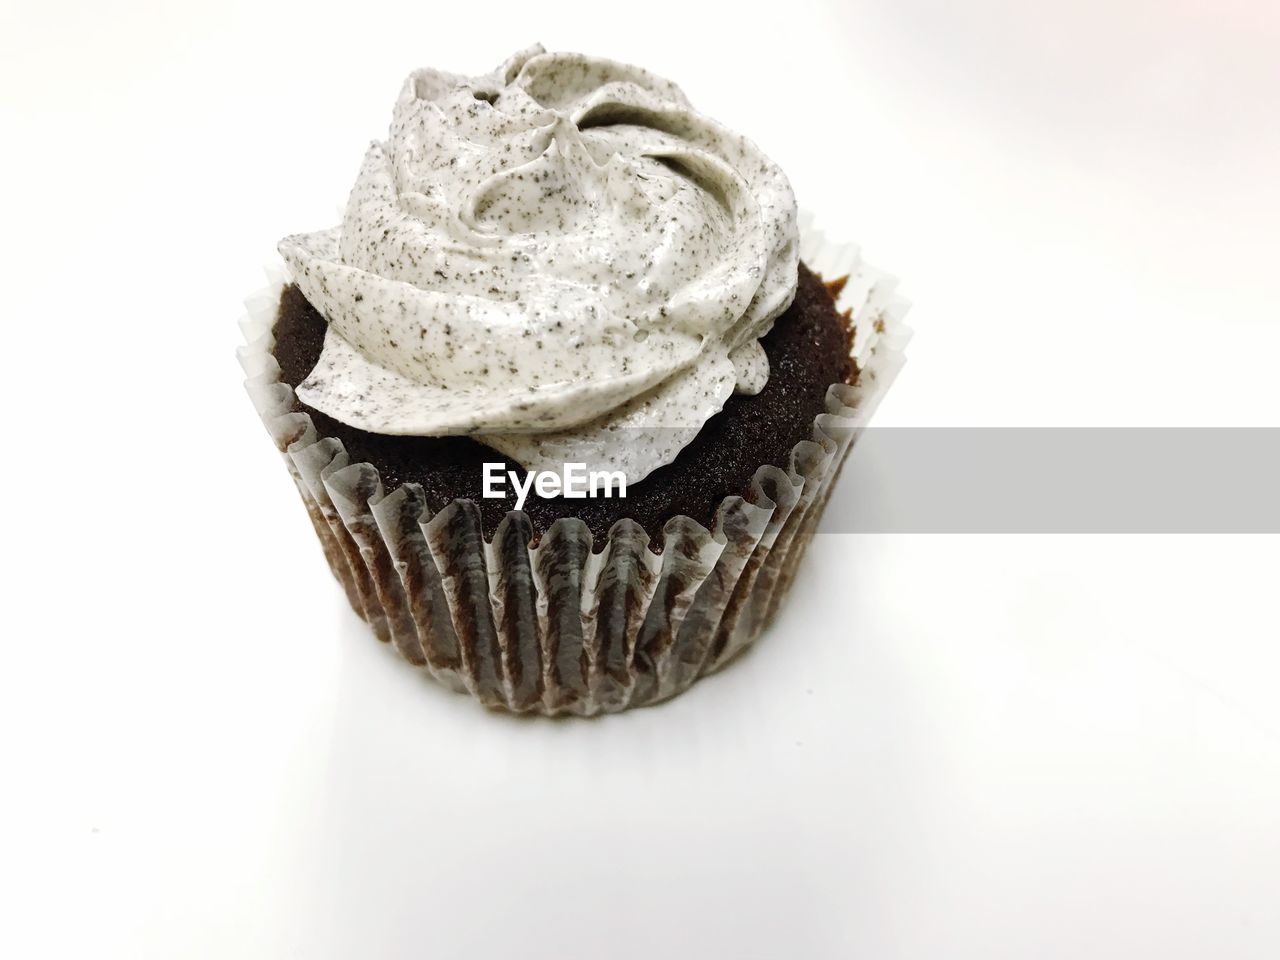 Close-up of cupcake on white background